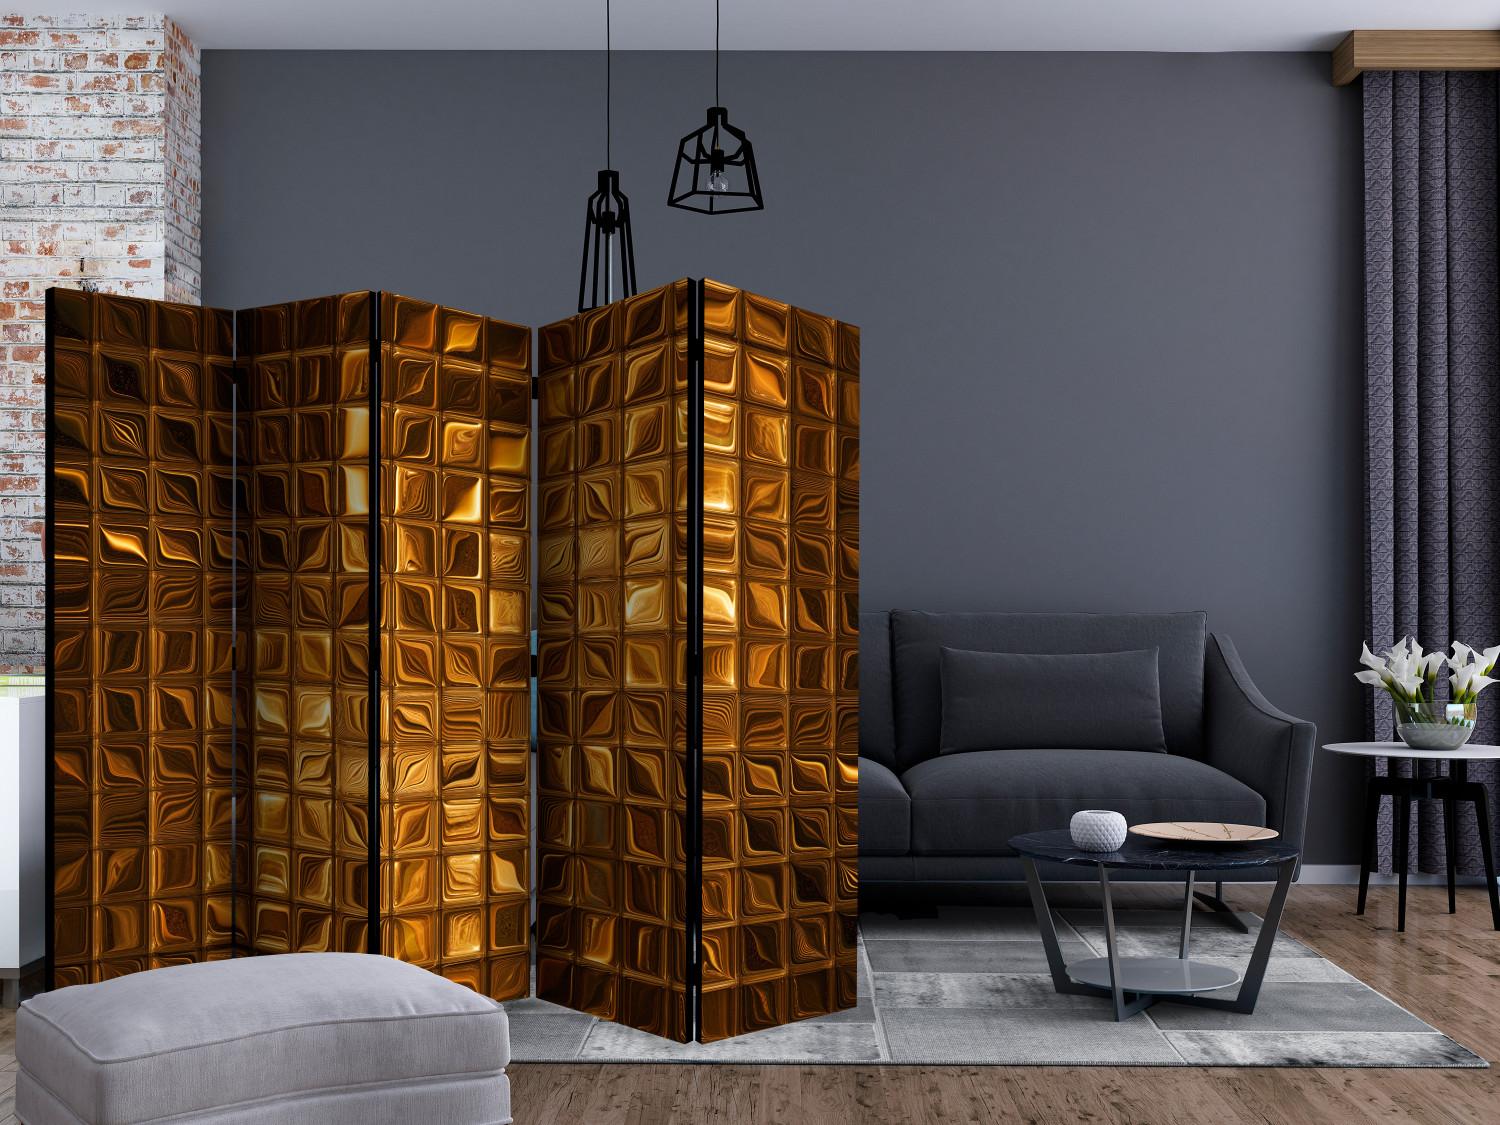 Biombo barato Riddle of the Majesty II [Room Dividers]